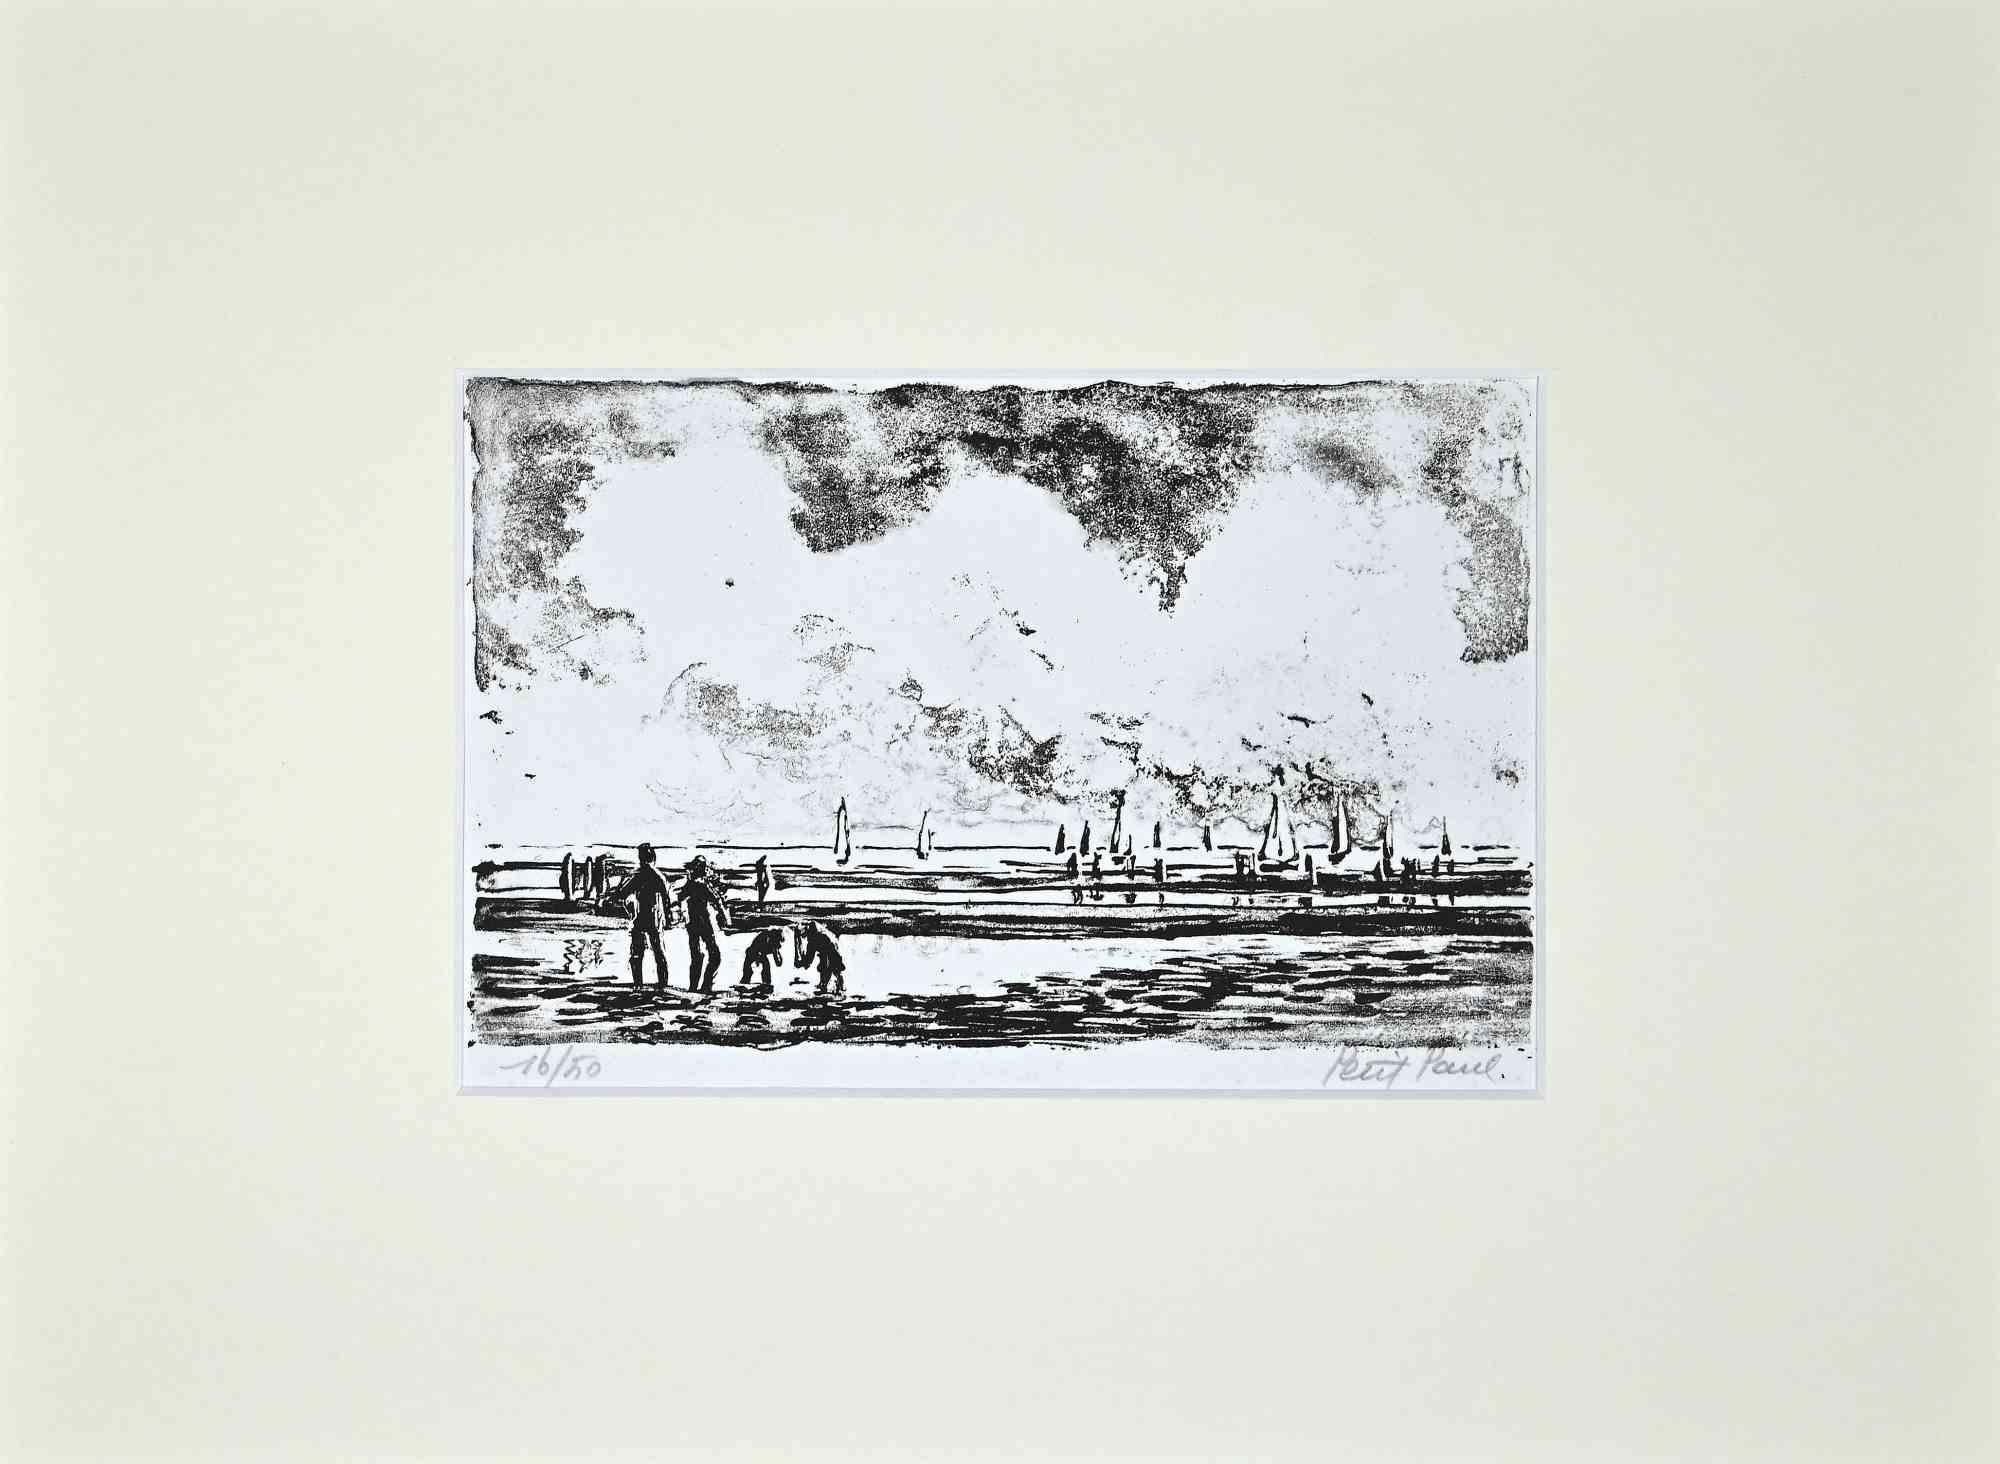 Seascape with Boatsis an original lithograph realized by Paul Petit in the mid-20th.

Hand-signed.

Numbered. Edition, 16/50.

The artwork is depicted through confident strokes in a well-balanced composition.